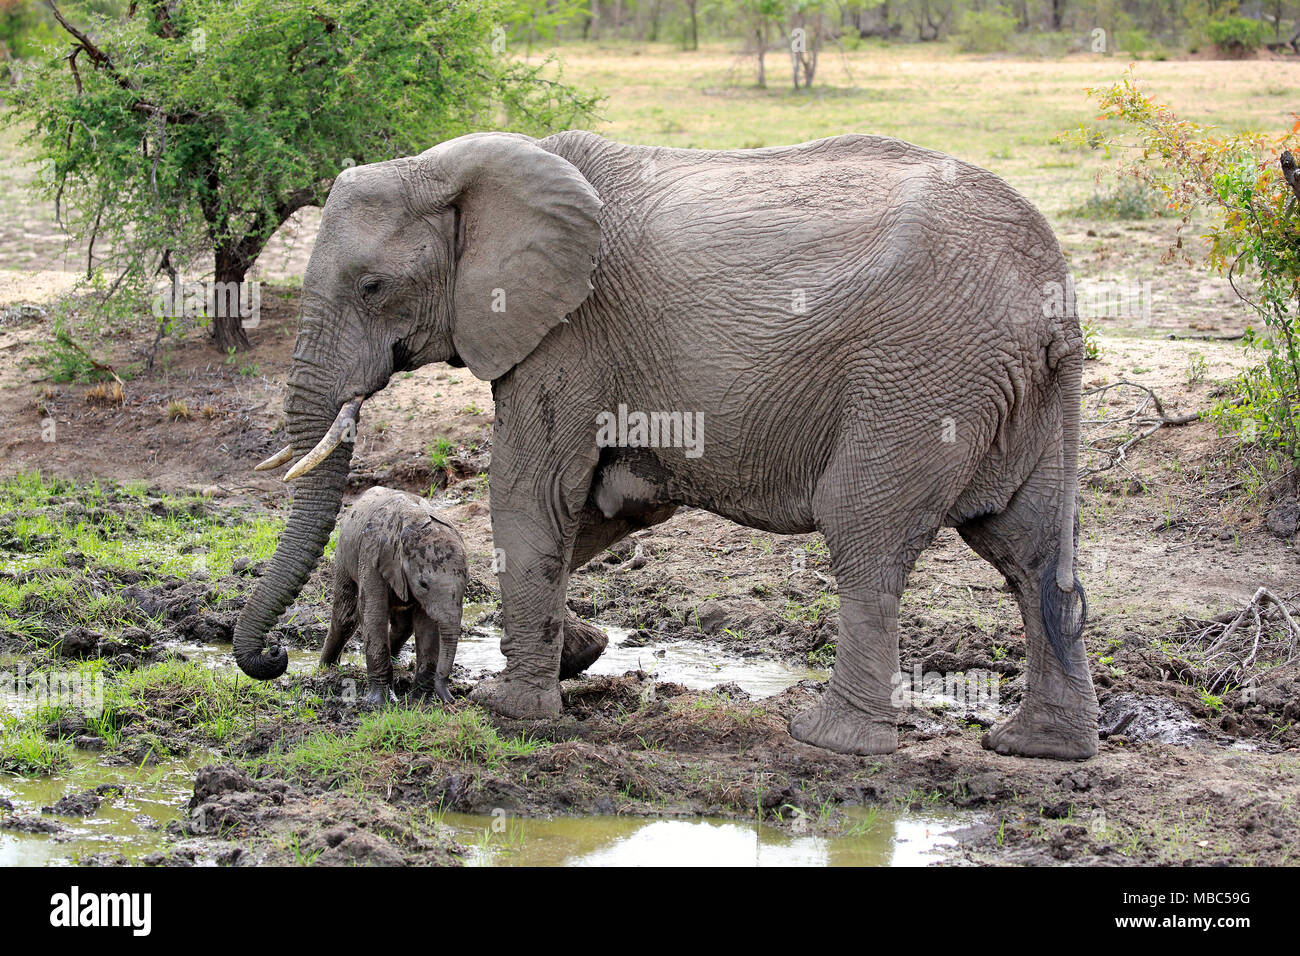 African elephants (Loxodonta africana), elephant cow with young animal at the mud hole, Sabi Sand Game Reserve, South Africa Stock Photo